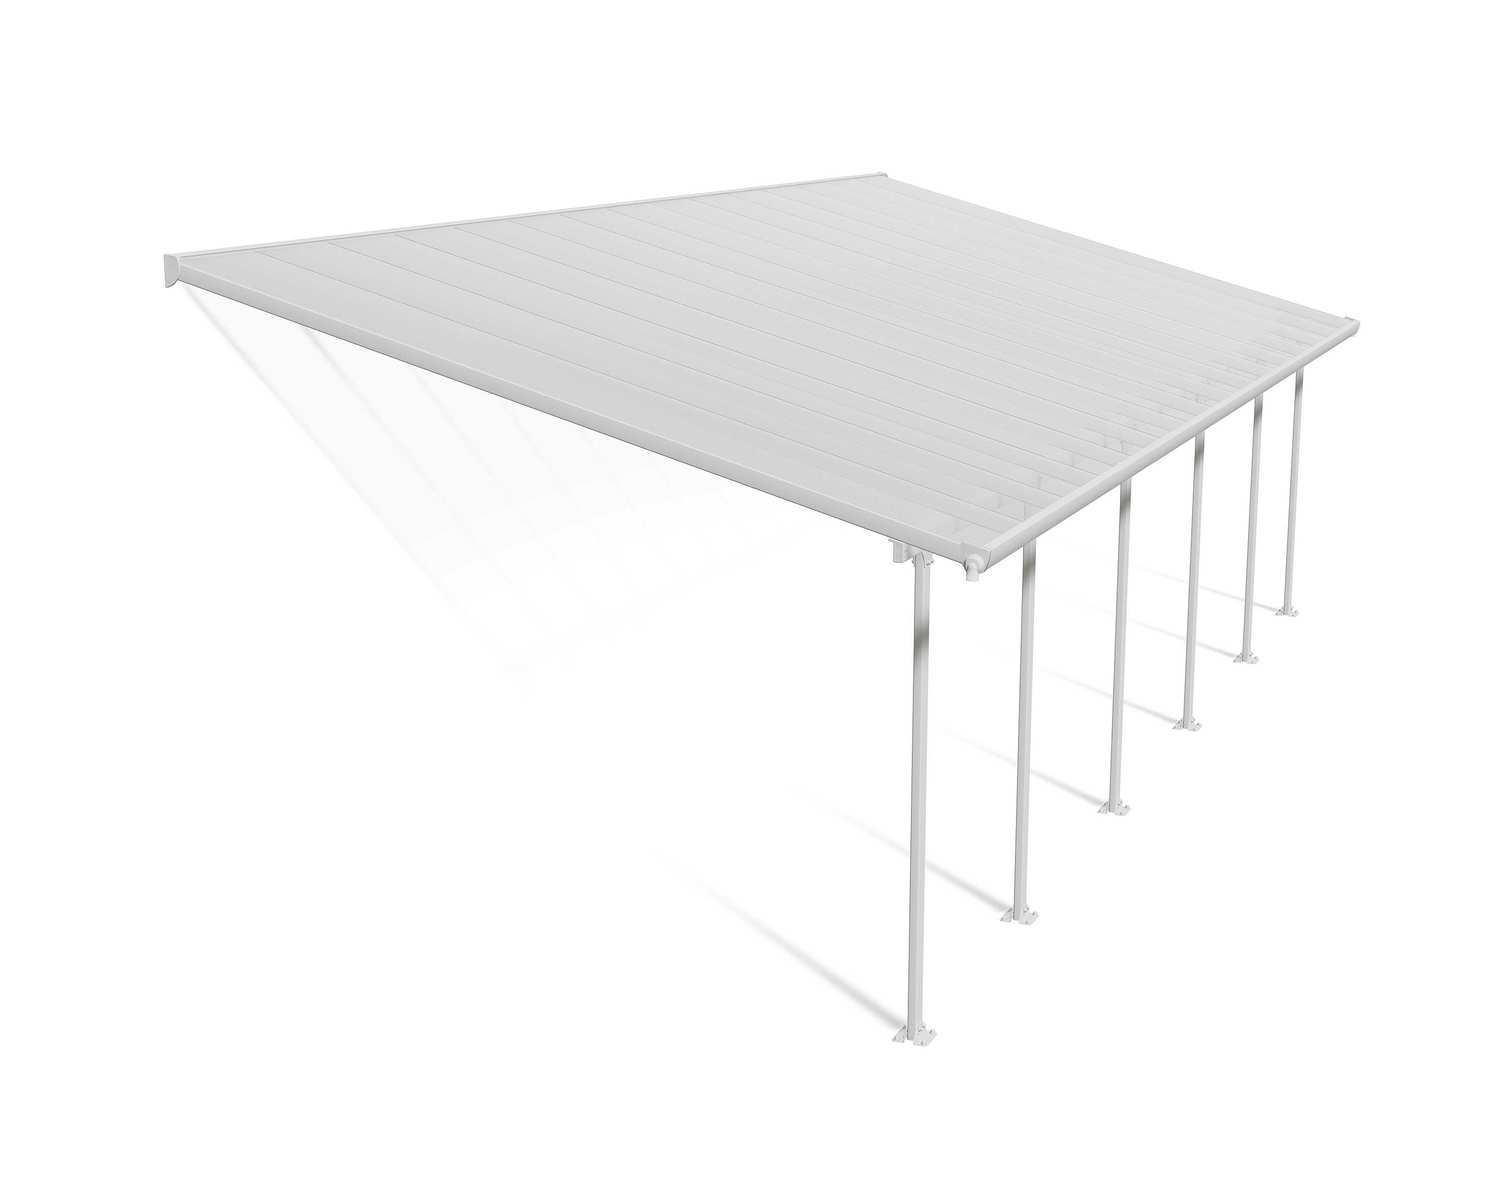 Patio Cover Kit Feria 4 ft. x 10.31 ft. White Structure &amp; Clear Multi Wall Glazing